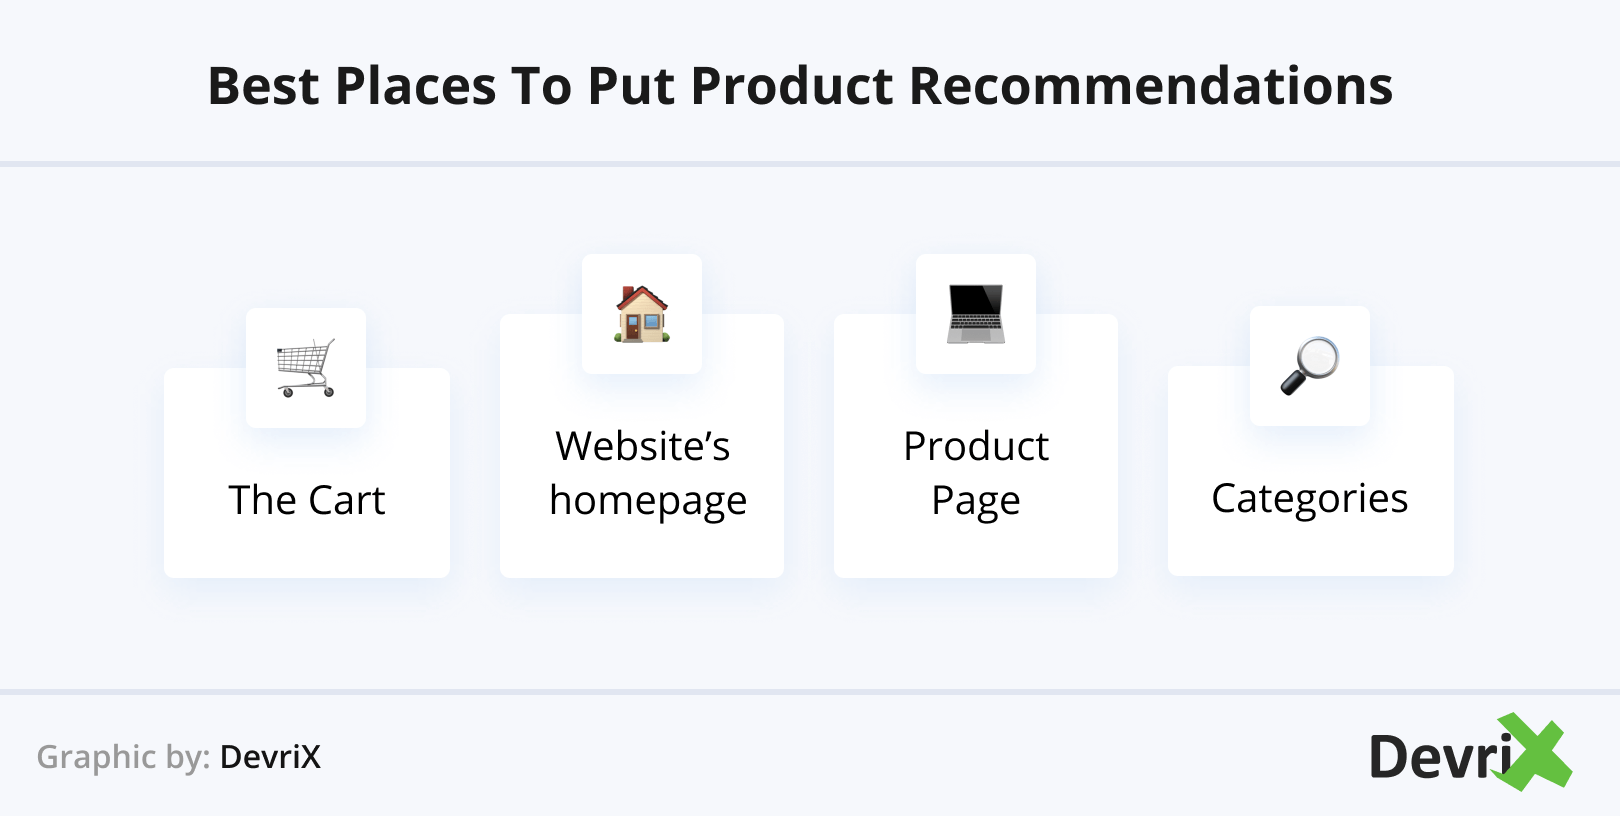 Best Places to Put Product Recommendations